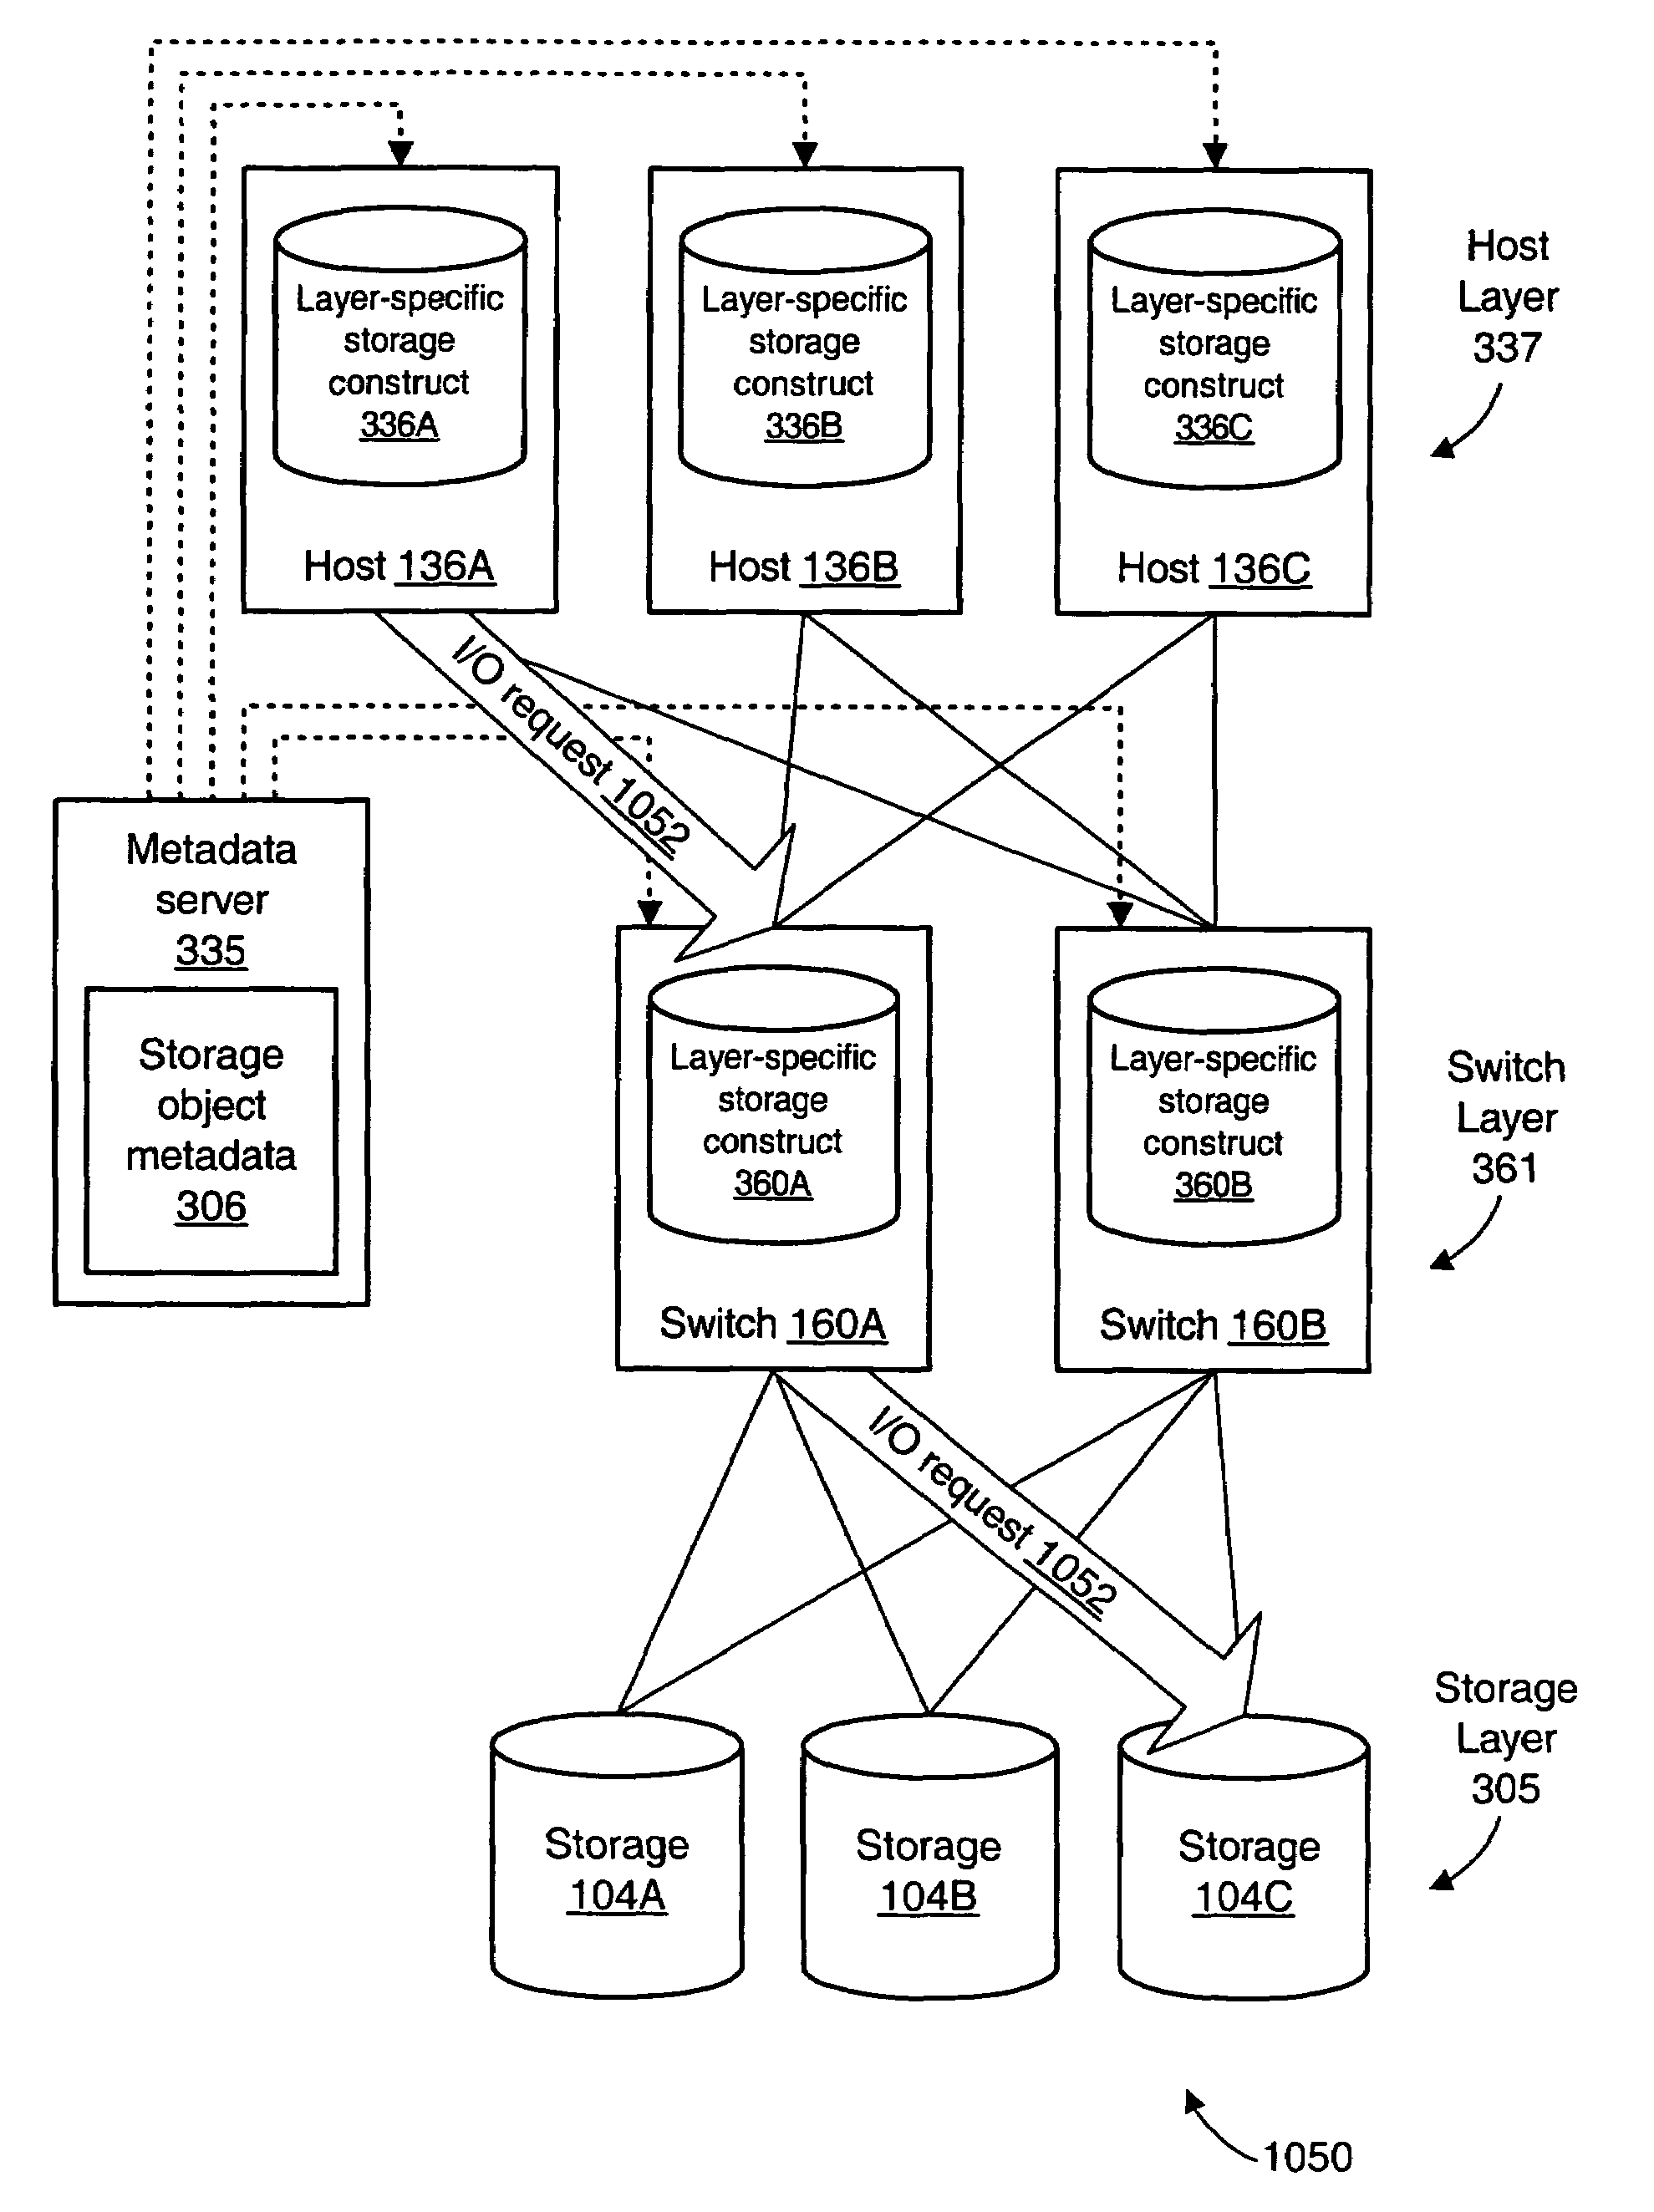 Coordination of quality of service in a multi-layer virtualized storage environment